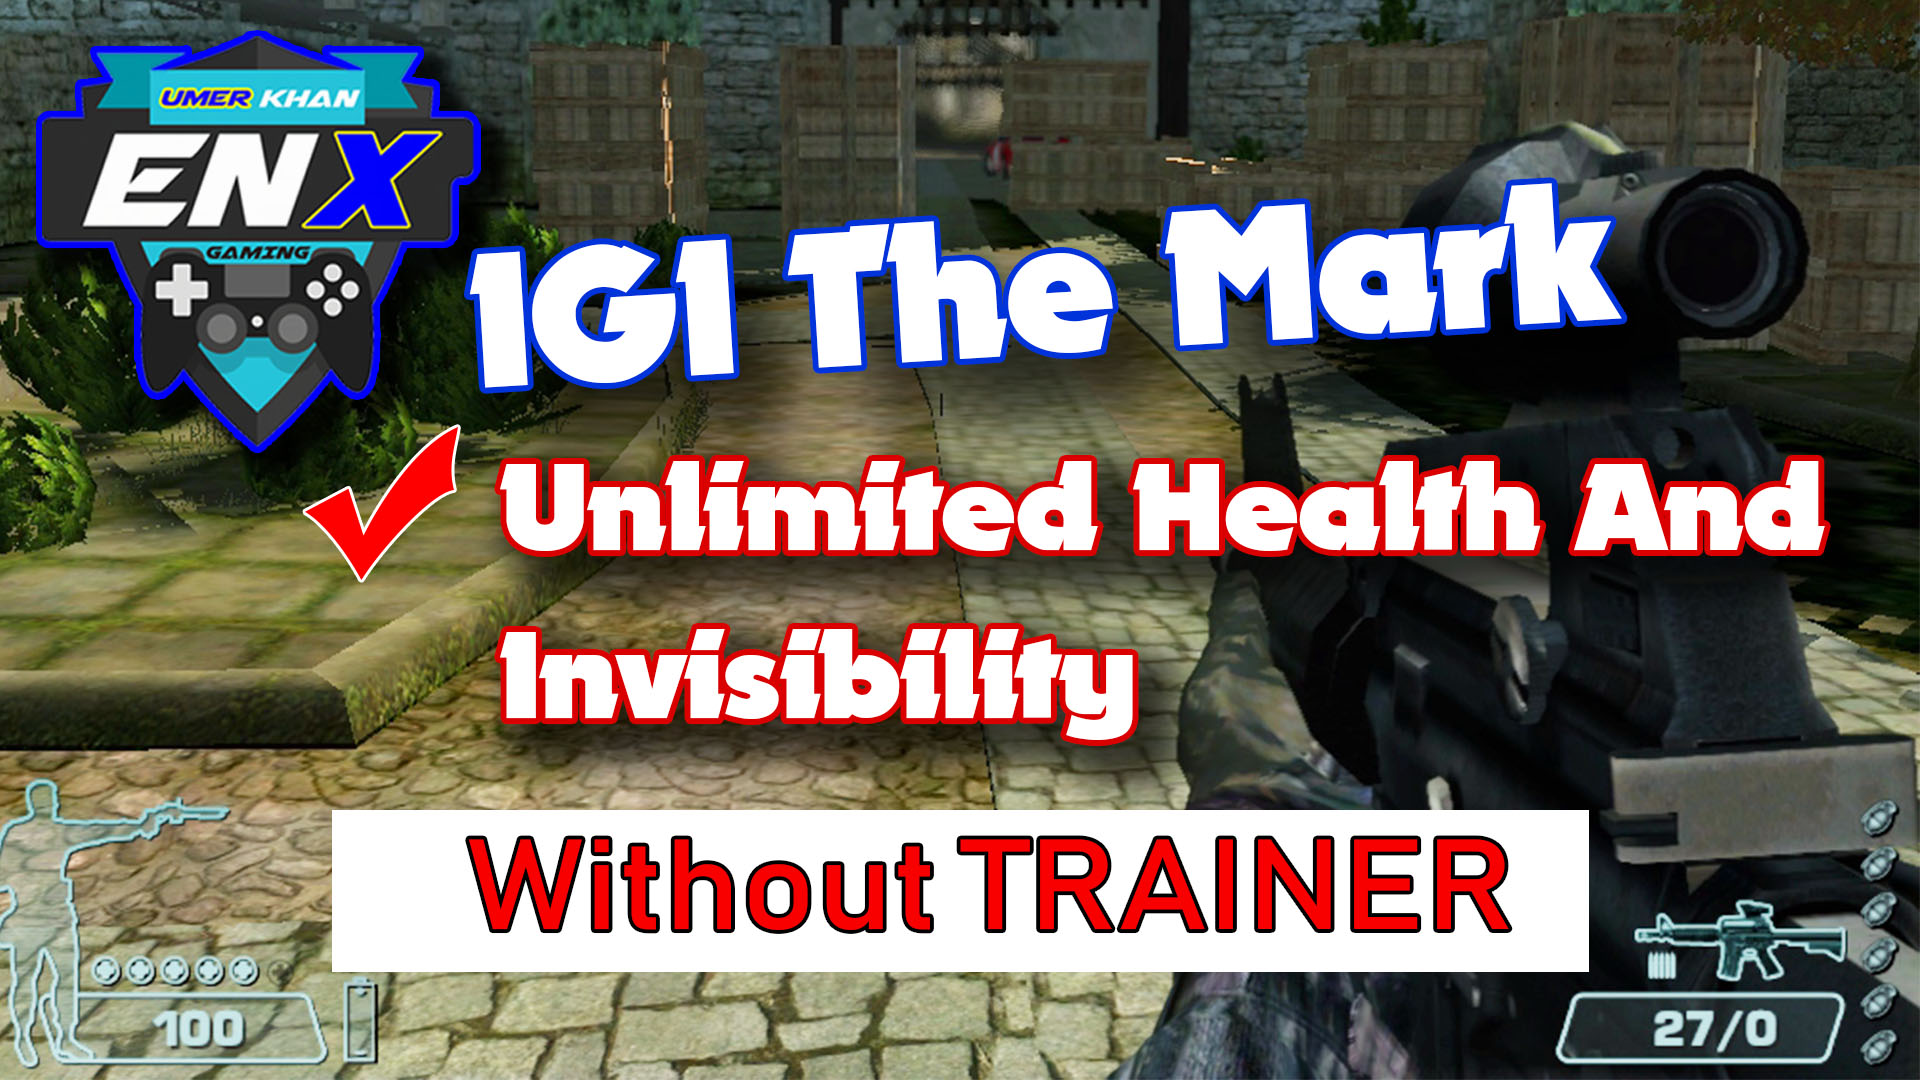 igi 2 cheat codes for unlimited health download